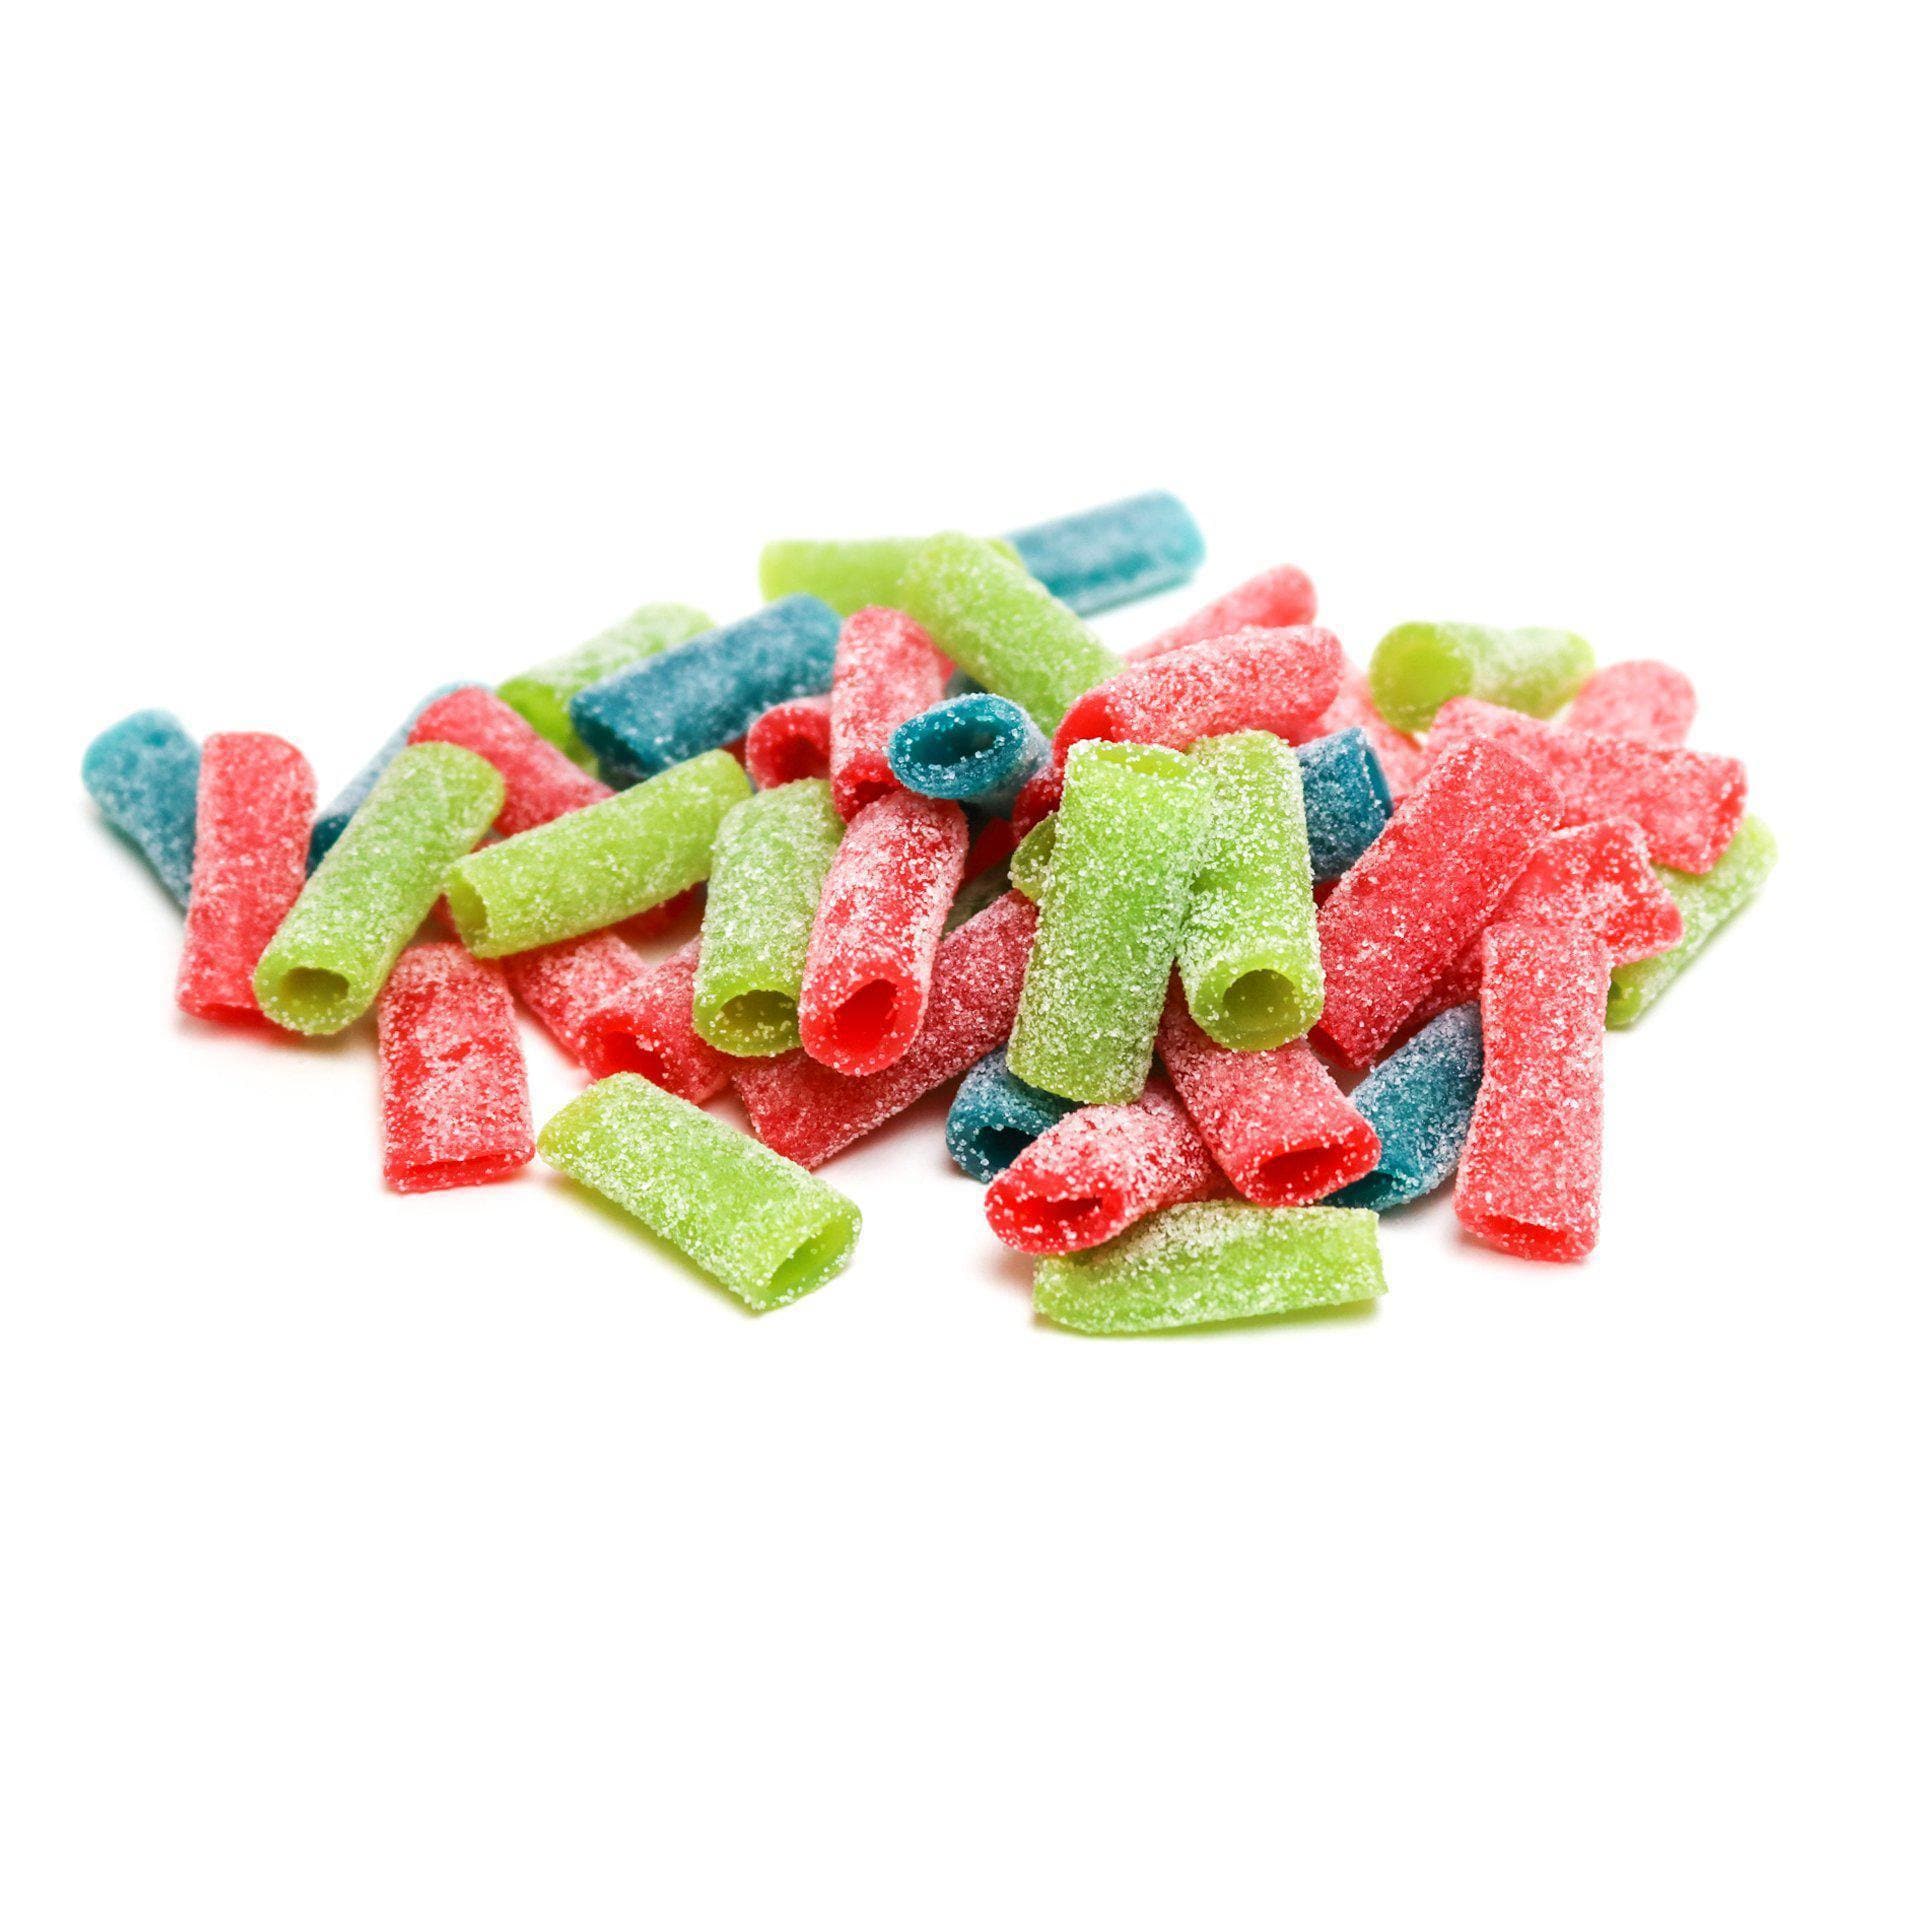 Sour Punch Assorted Bites candy in a pile - green apple, strawberry, and blue raspberry colorful candy bites